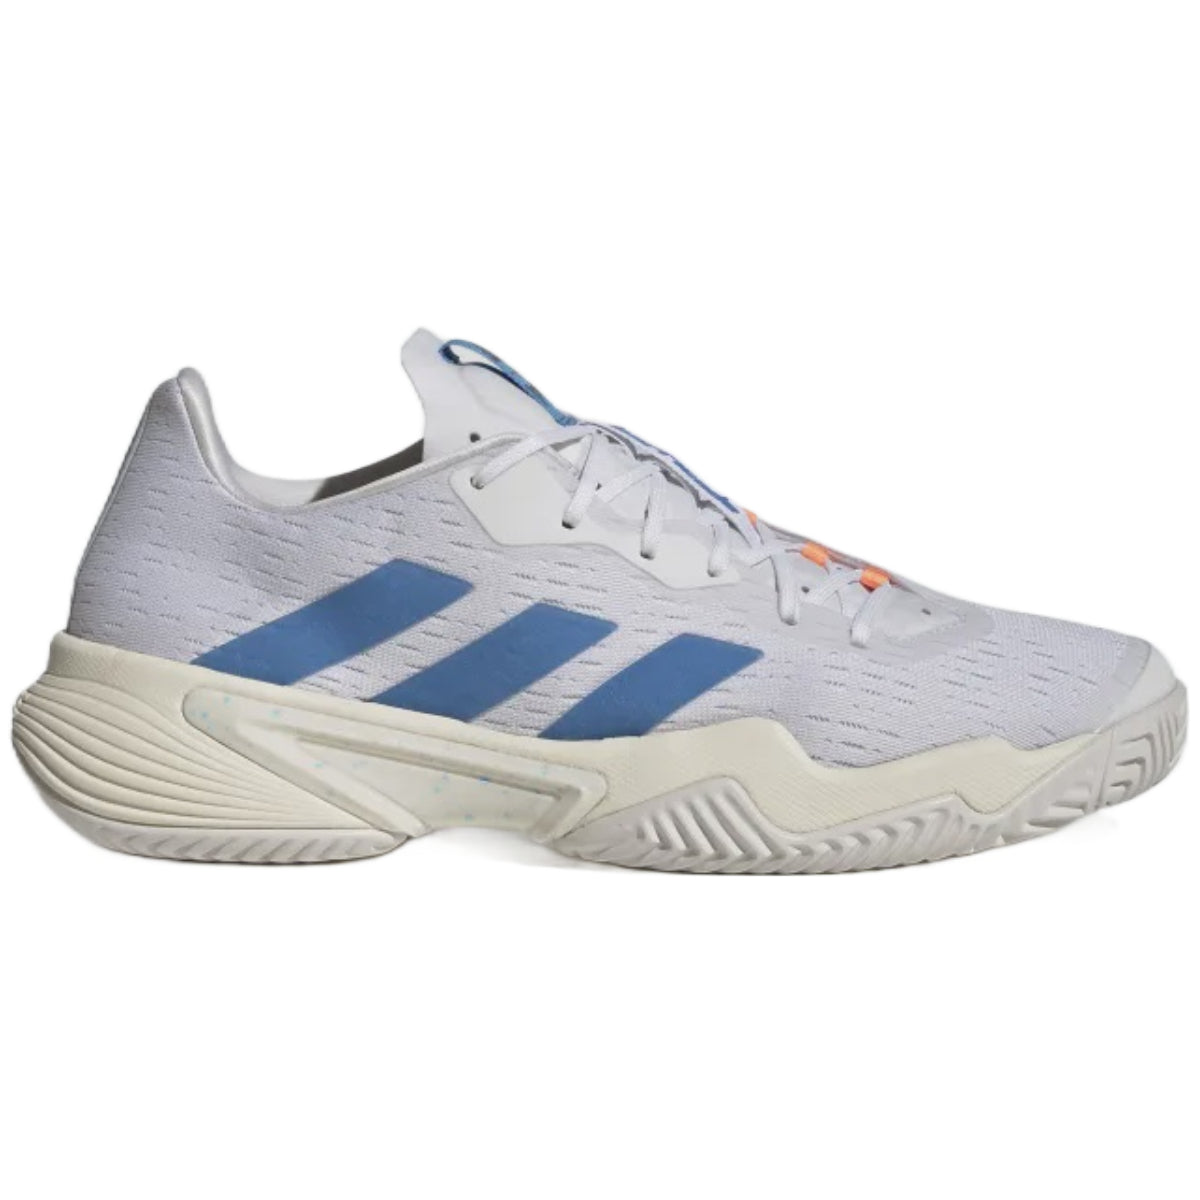 Adidas Barricade M Parley-GY1369 All About